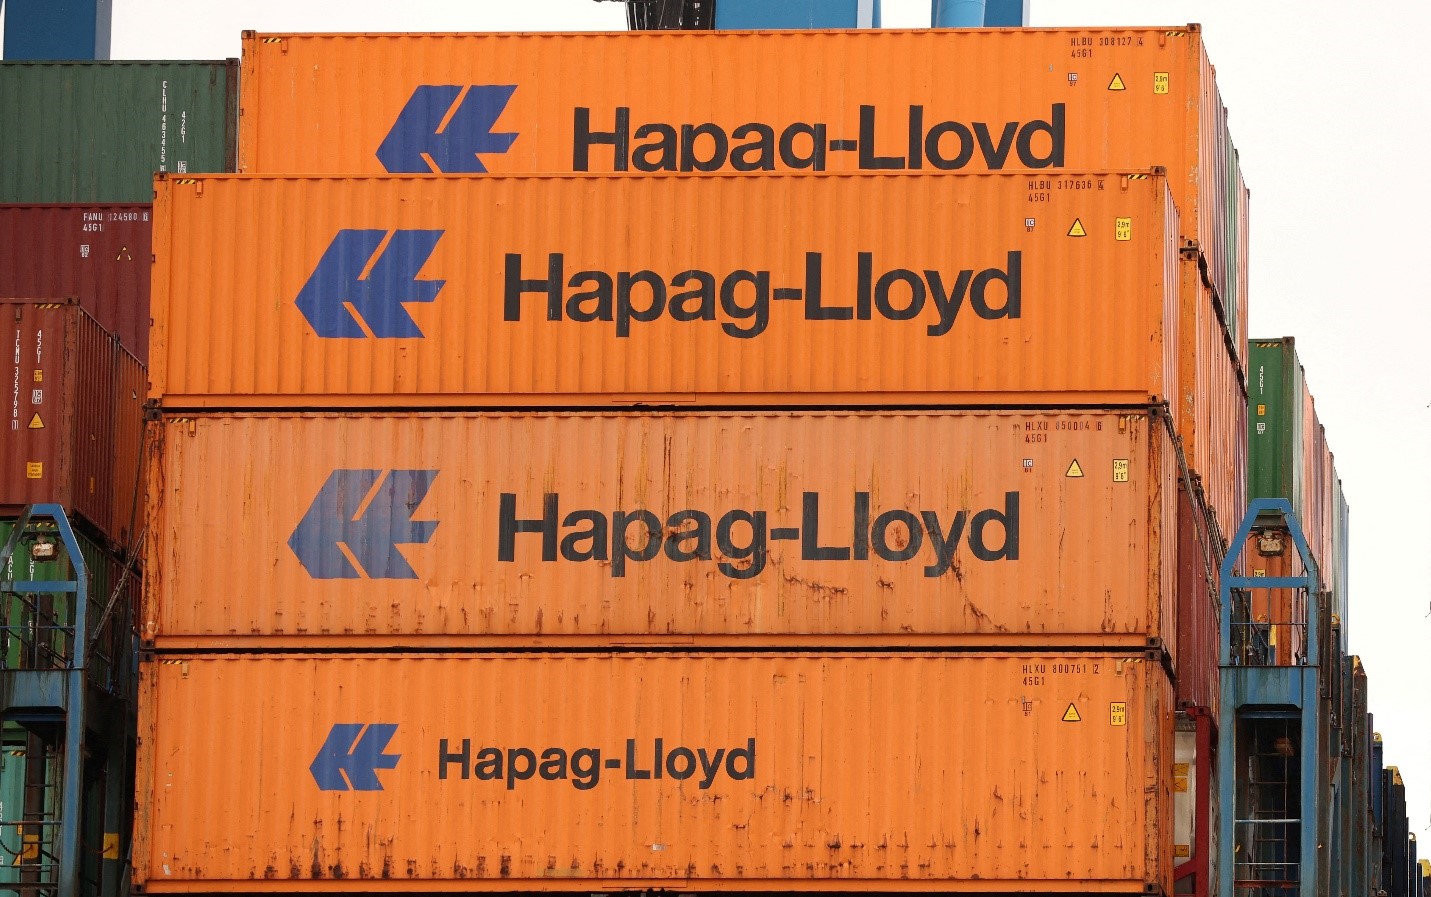 Hapag-Lloyd Maintains Avoidance of the Suez Canal, Citing Ongoing Security Risks